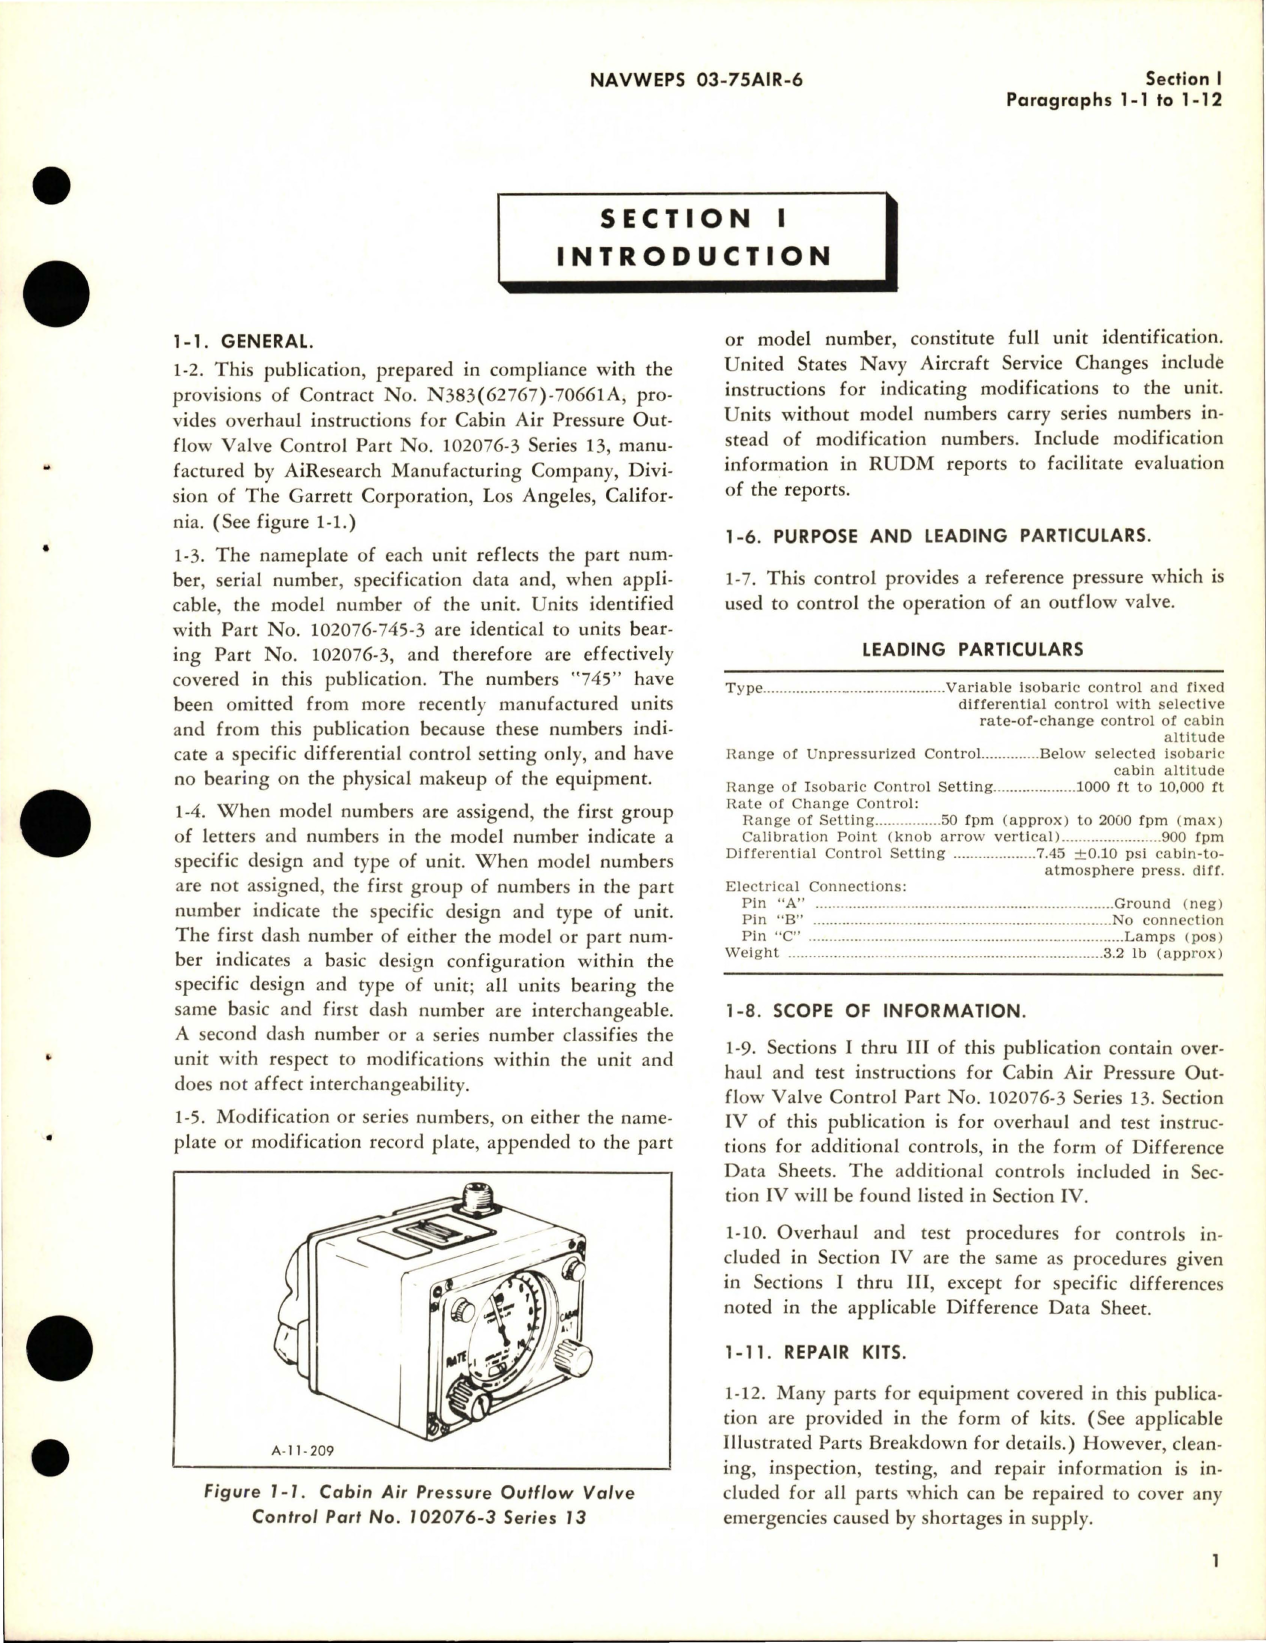 Sample page 5 from AirCorps Library document: Overhaul Instructions for Cabin Air Pressure Outflow Valve Control - Part 102076-3